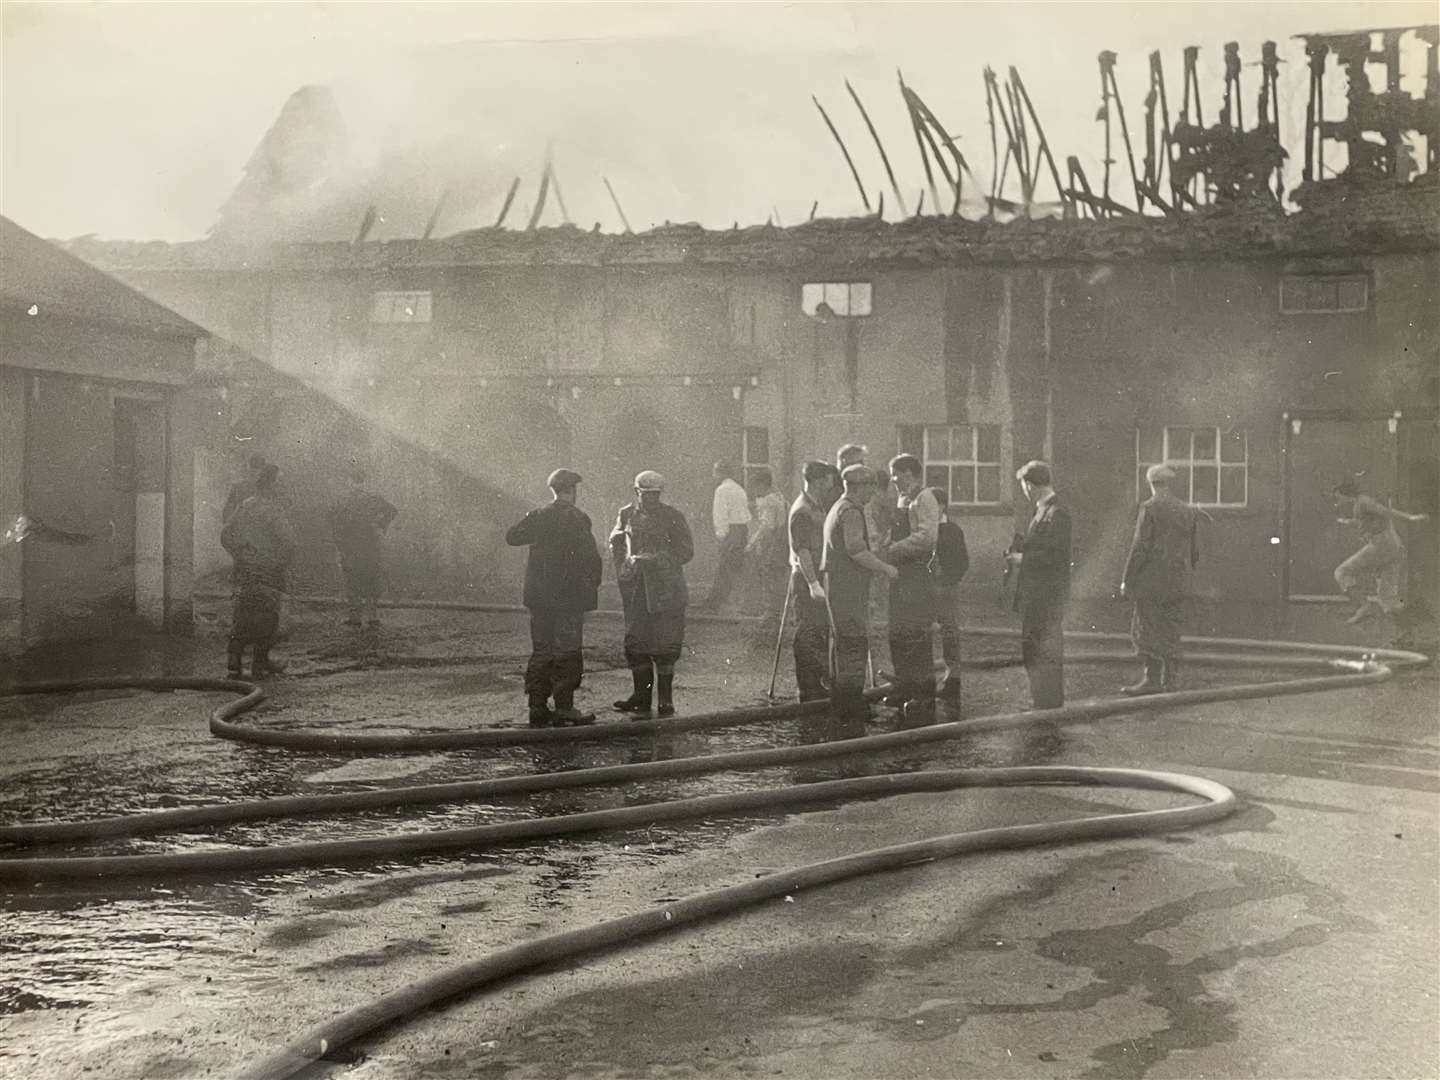 Bonawood chipboard factory after it burnt down.